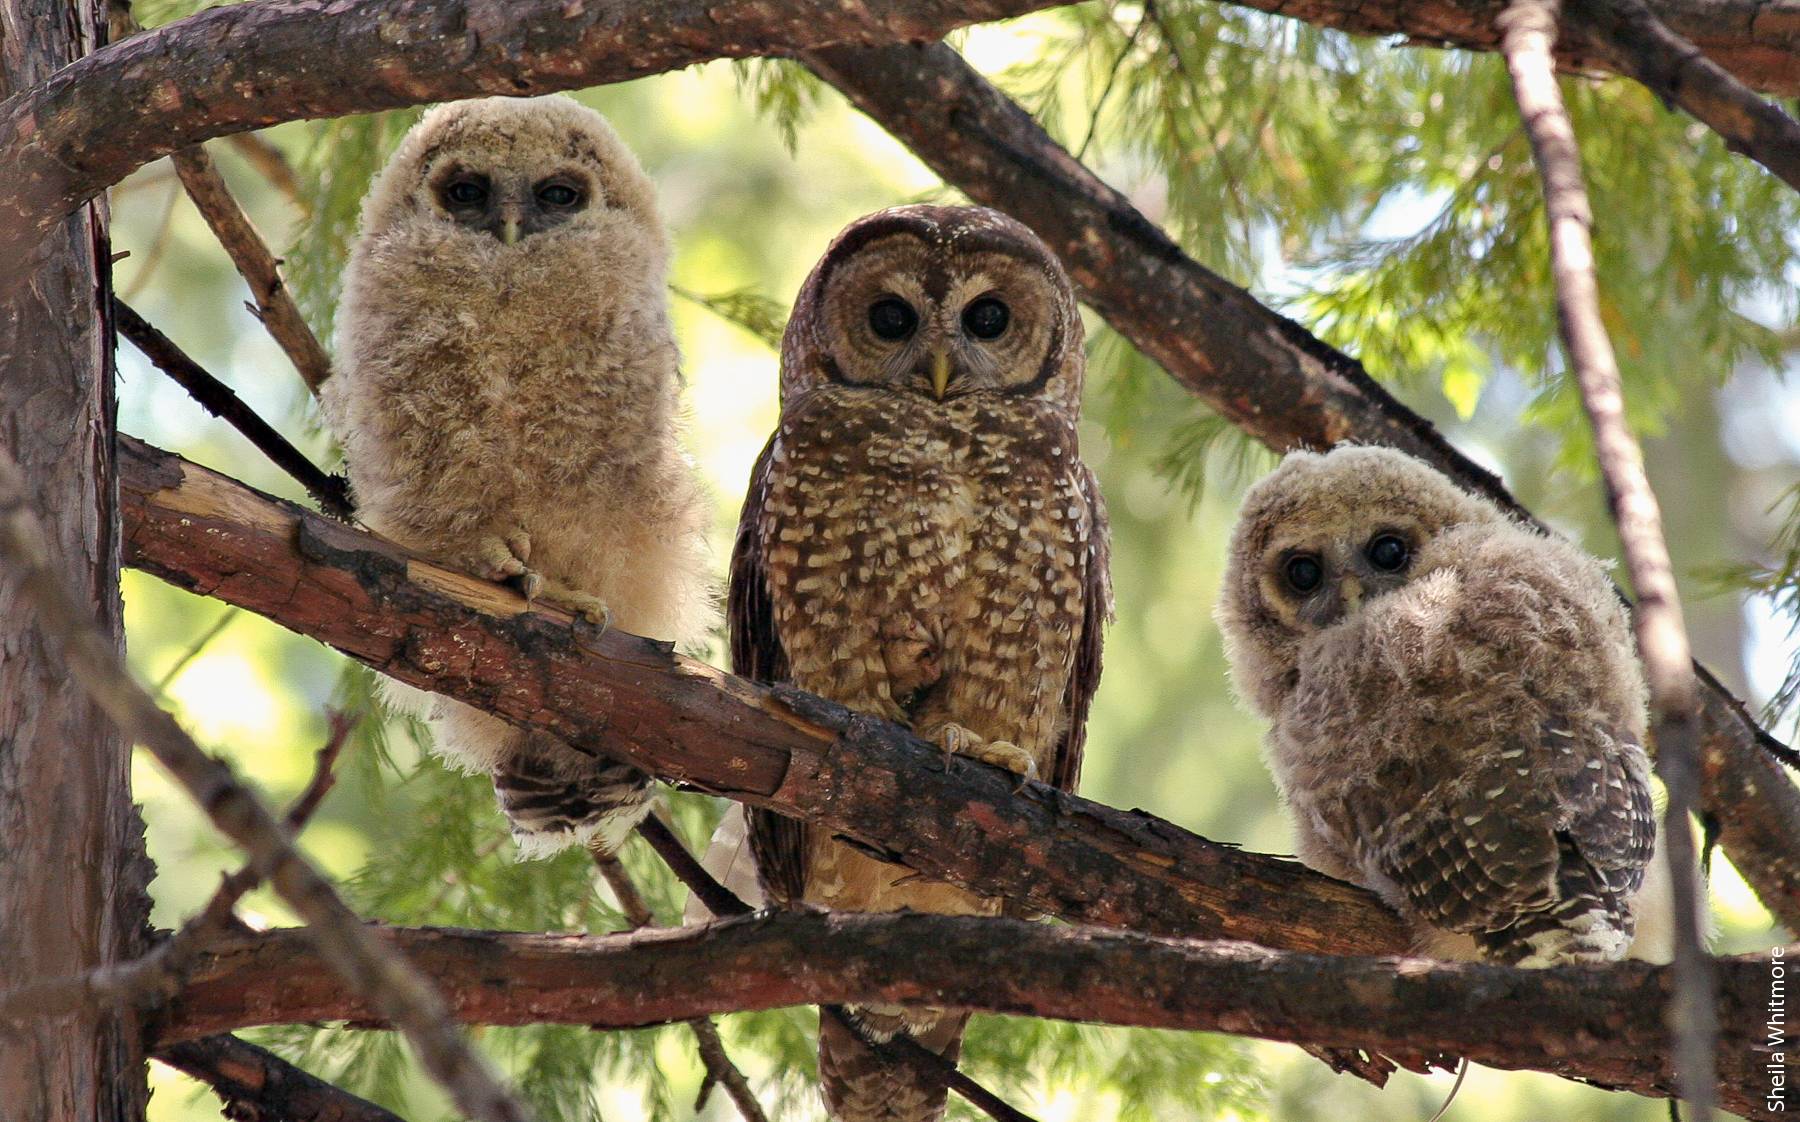 SNAMP researchers analyzed the effects of vegetation management treatments in the Sierra Nevada on forest health, fire behavior, water and wildlife such as the endangered California spotted owl.